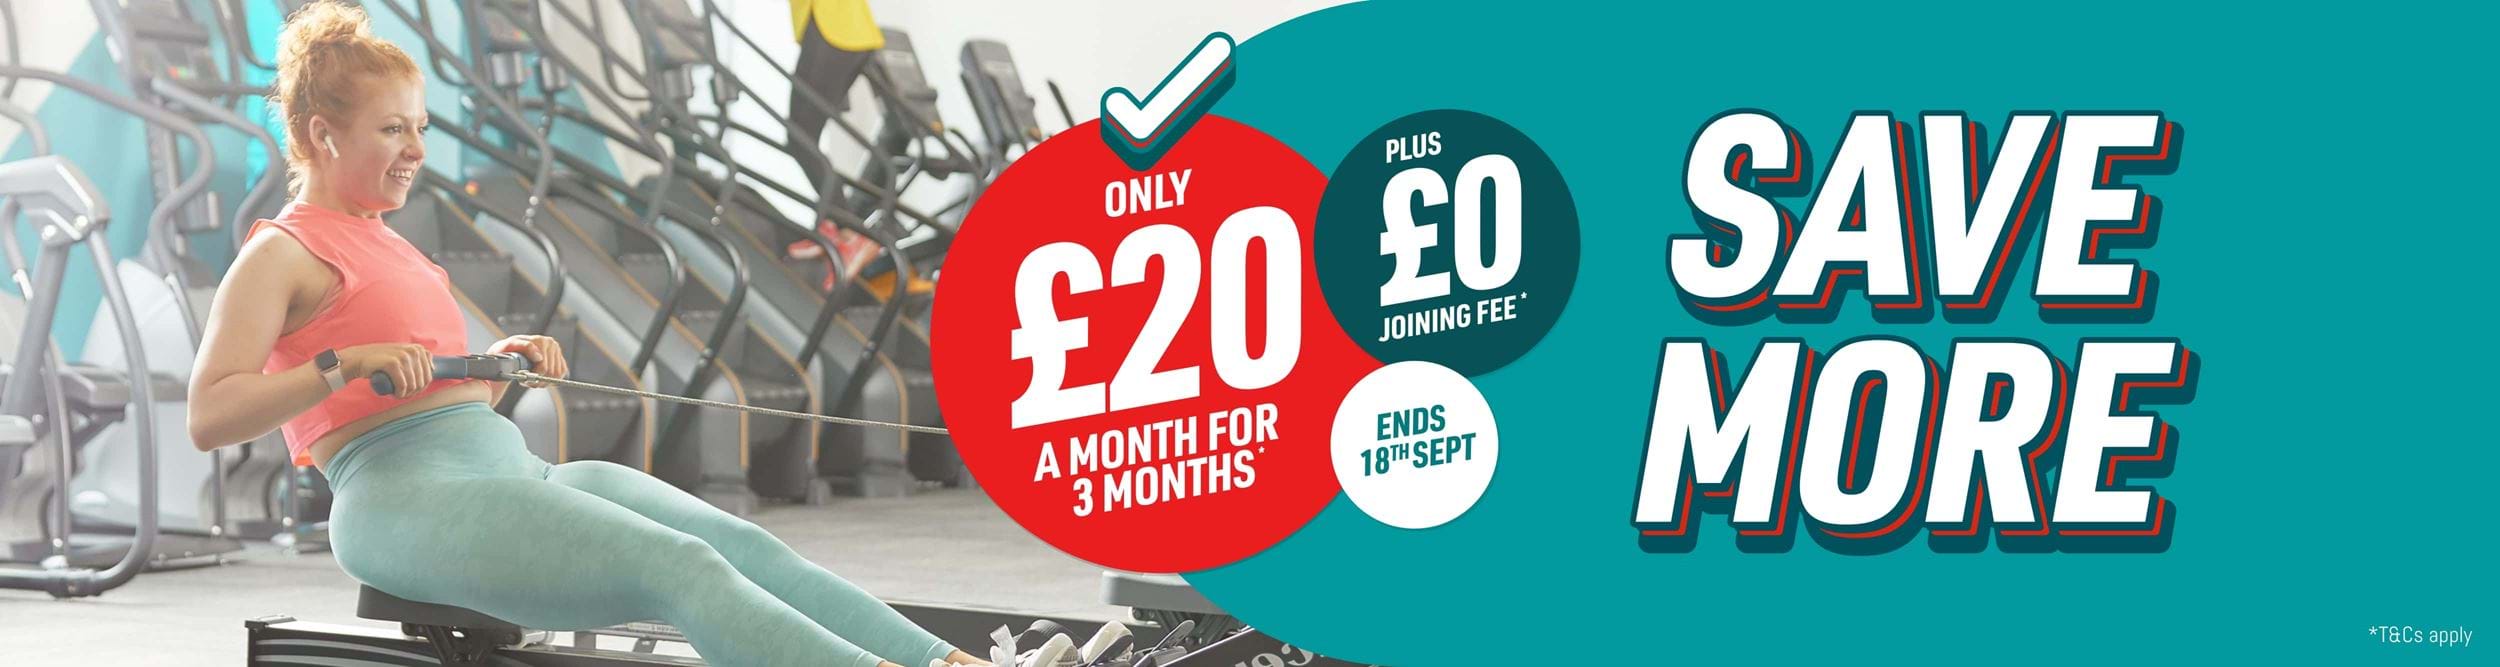 Exclusive deals at our London gyms for a limited time only